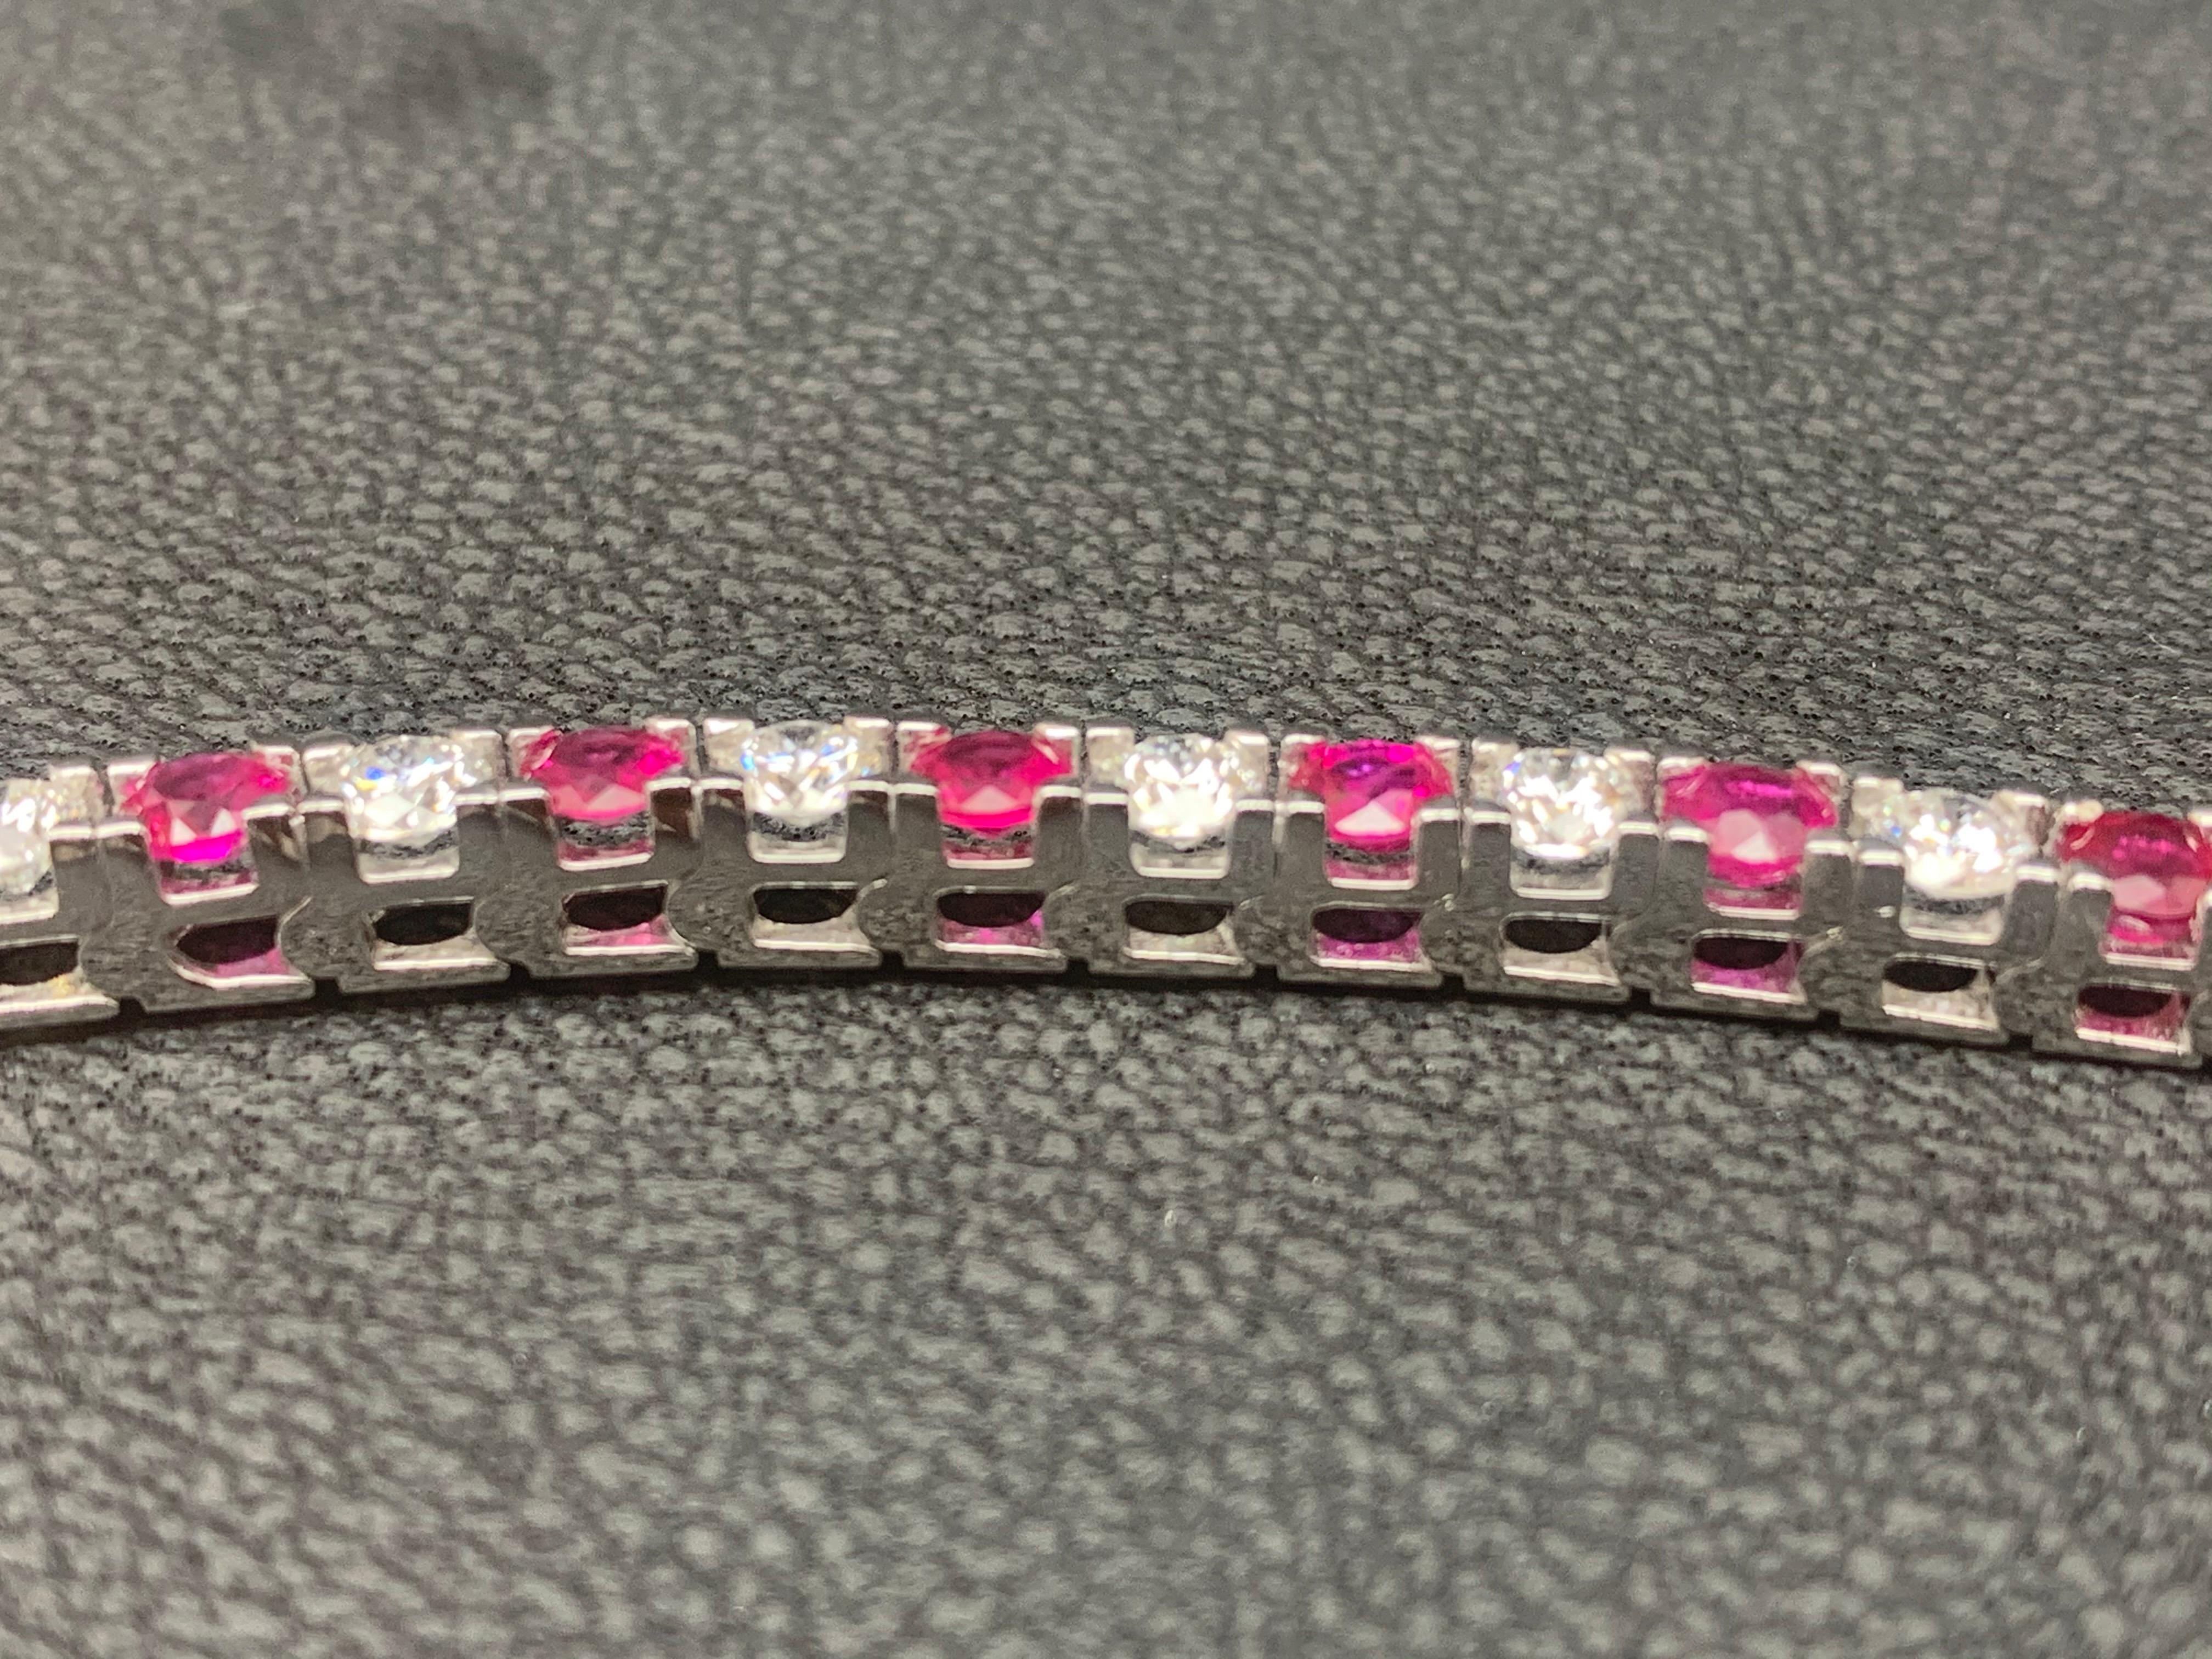 5.37 Carat Ruby and 3.52 Carat Diamond Tennis Bracelet in 18K White Gold For Sale 10